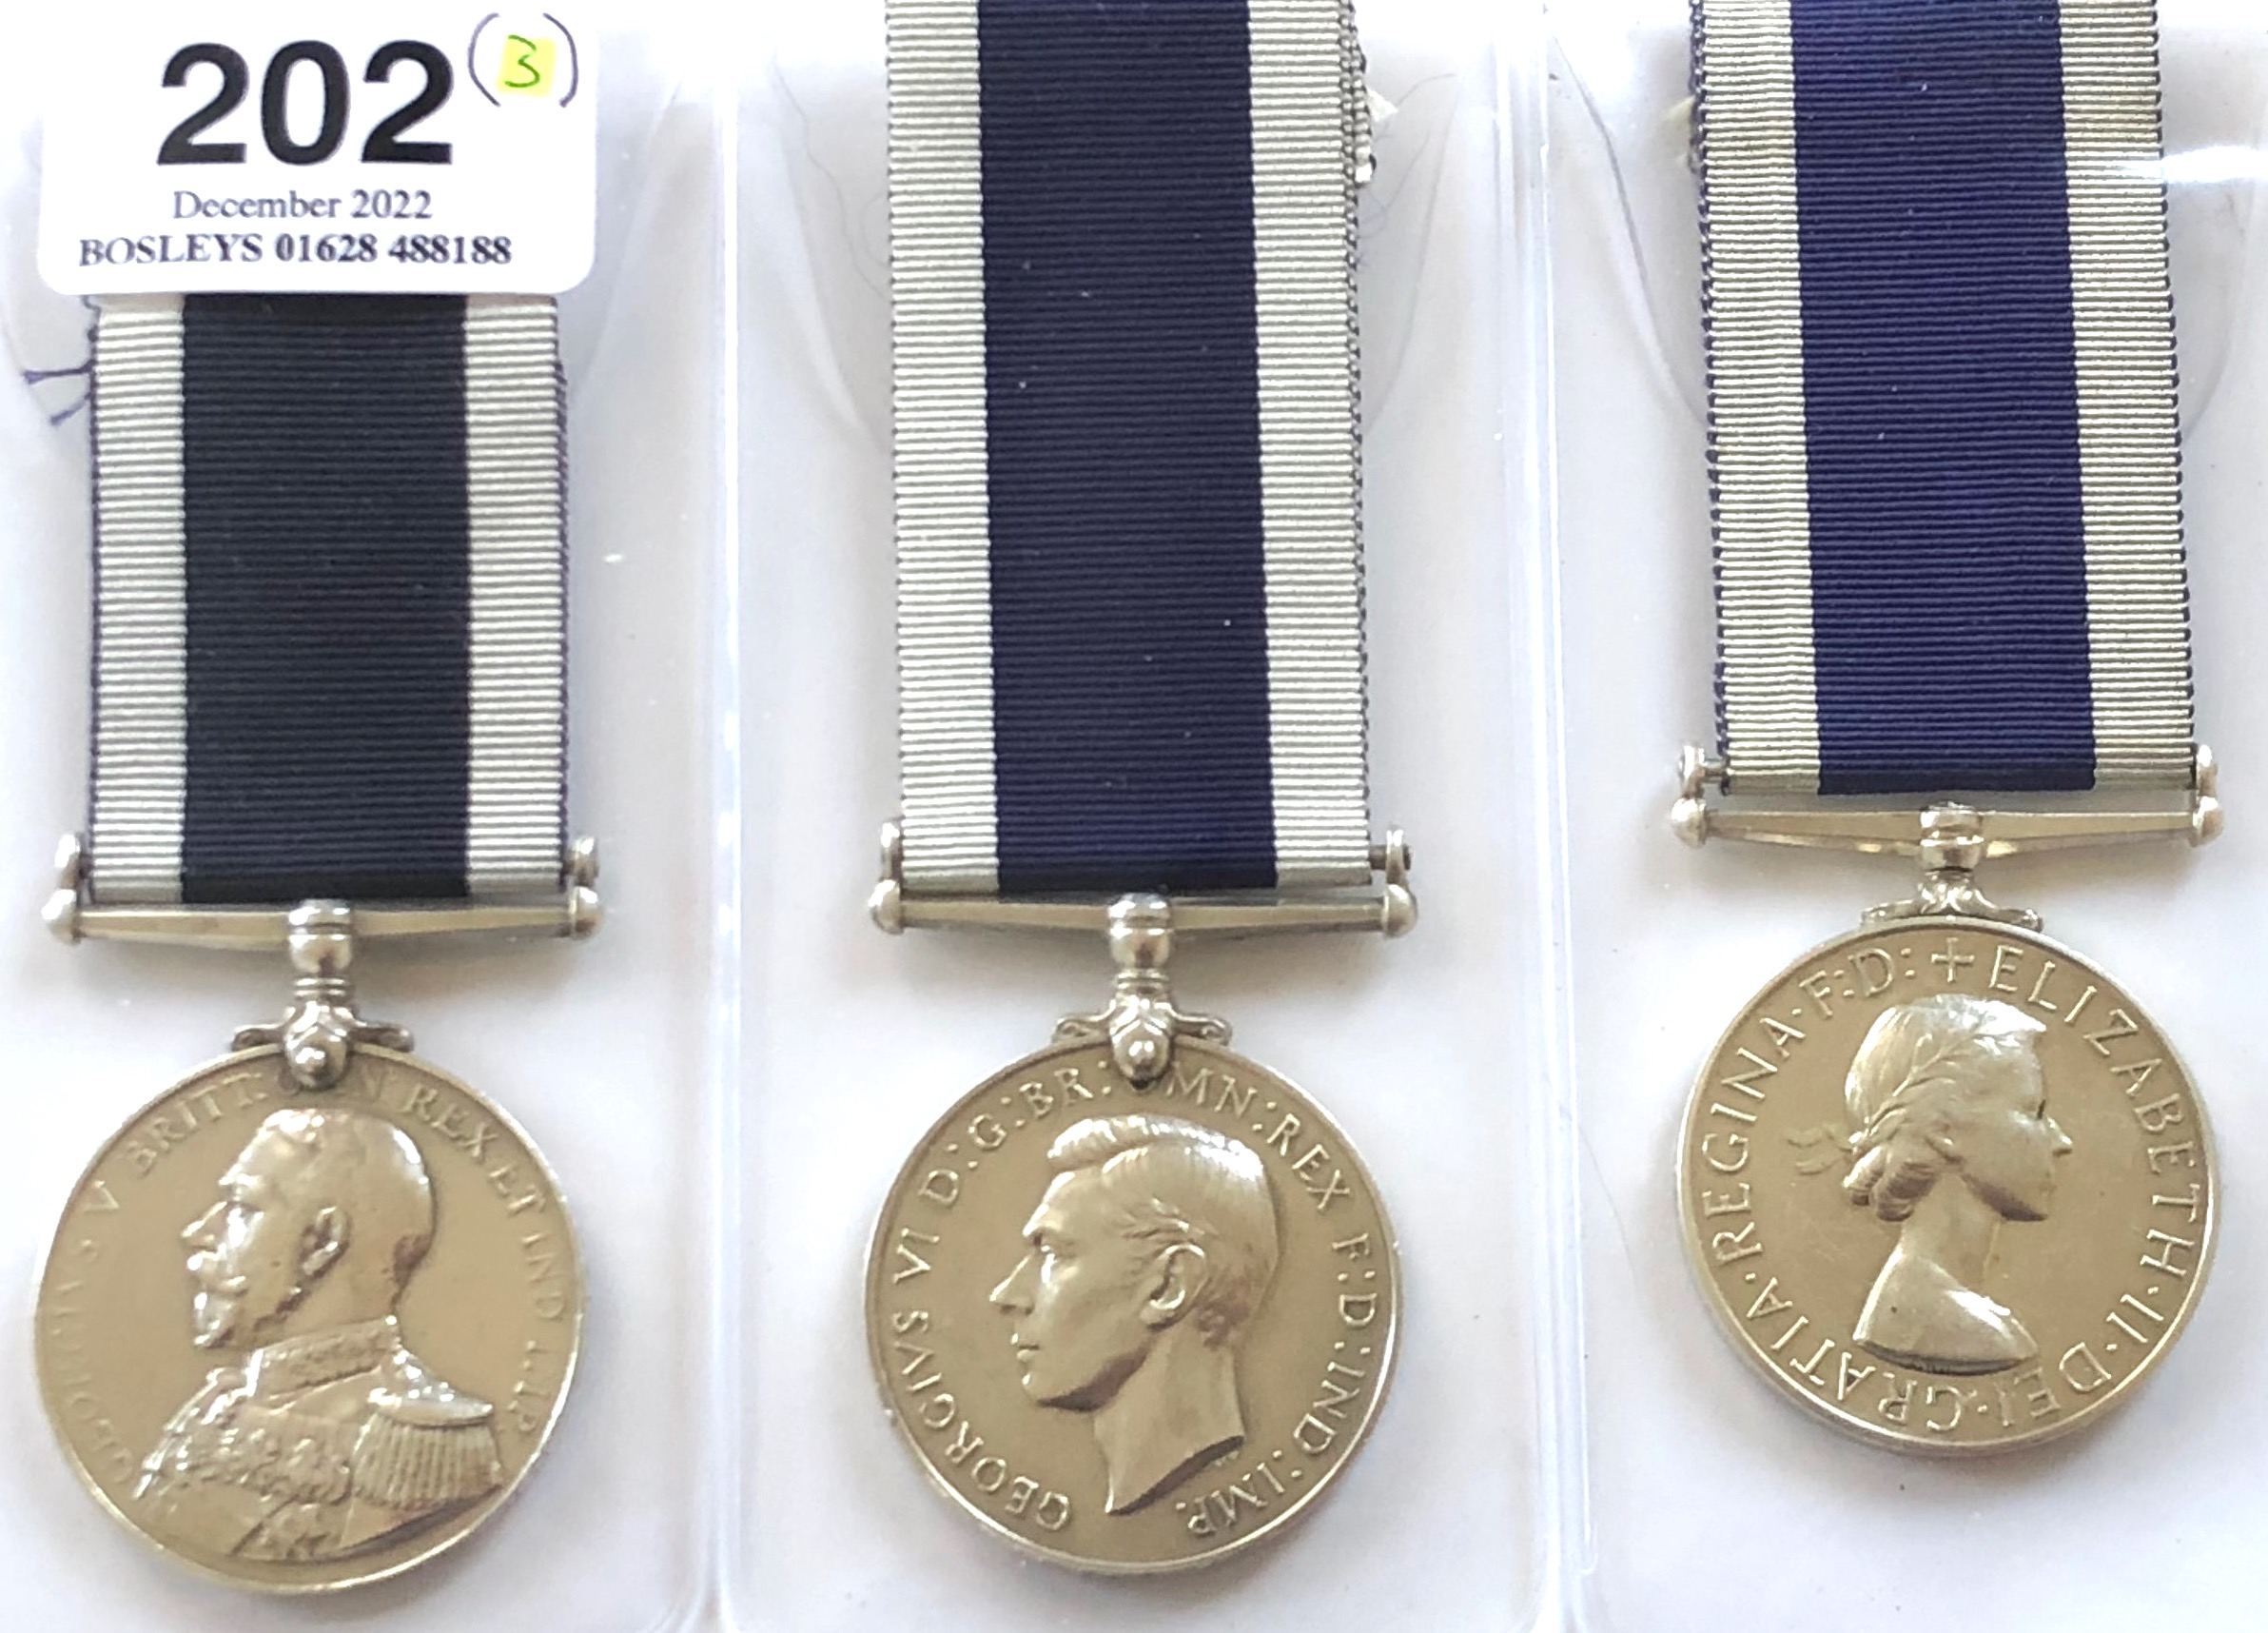 3 Royal Navy Long Service Good Conduct Medals. George V awarded to M.6710 O.E. GARN ORD ART 4 CL HMS